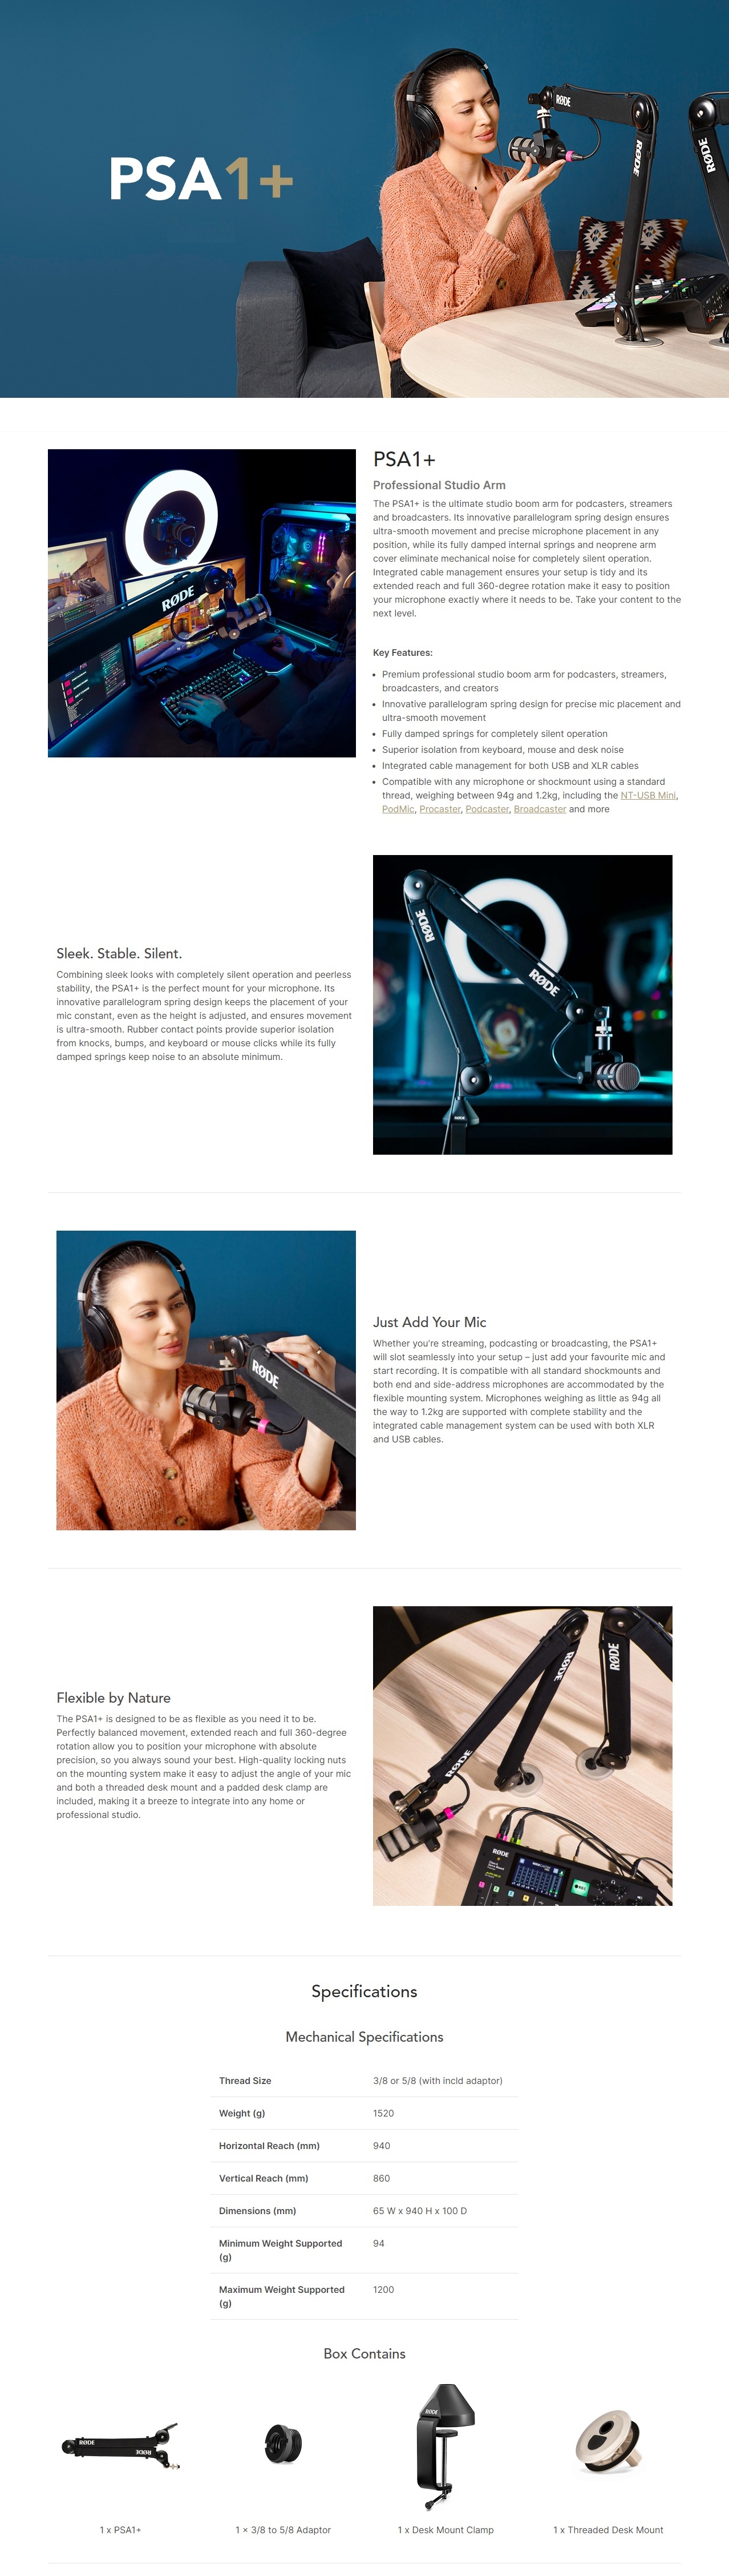 A large marketing image providing additional information about the product RODE PSA1+ Professional Studio Boom Mic Arm - Additional alt info not provided